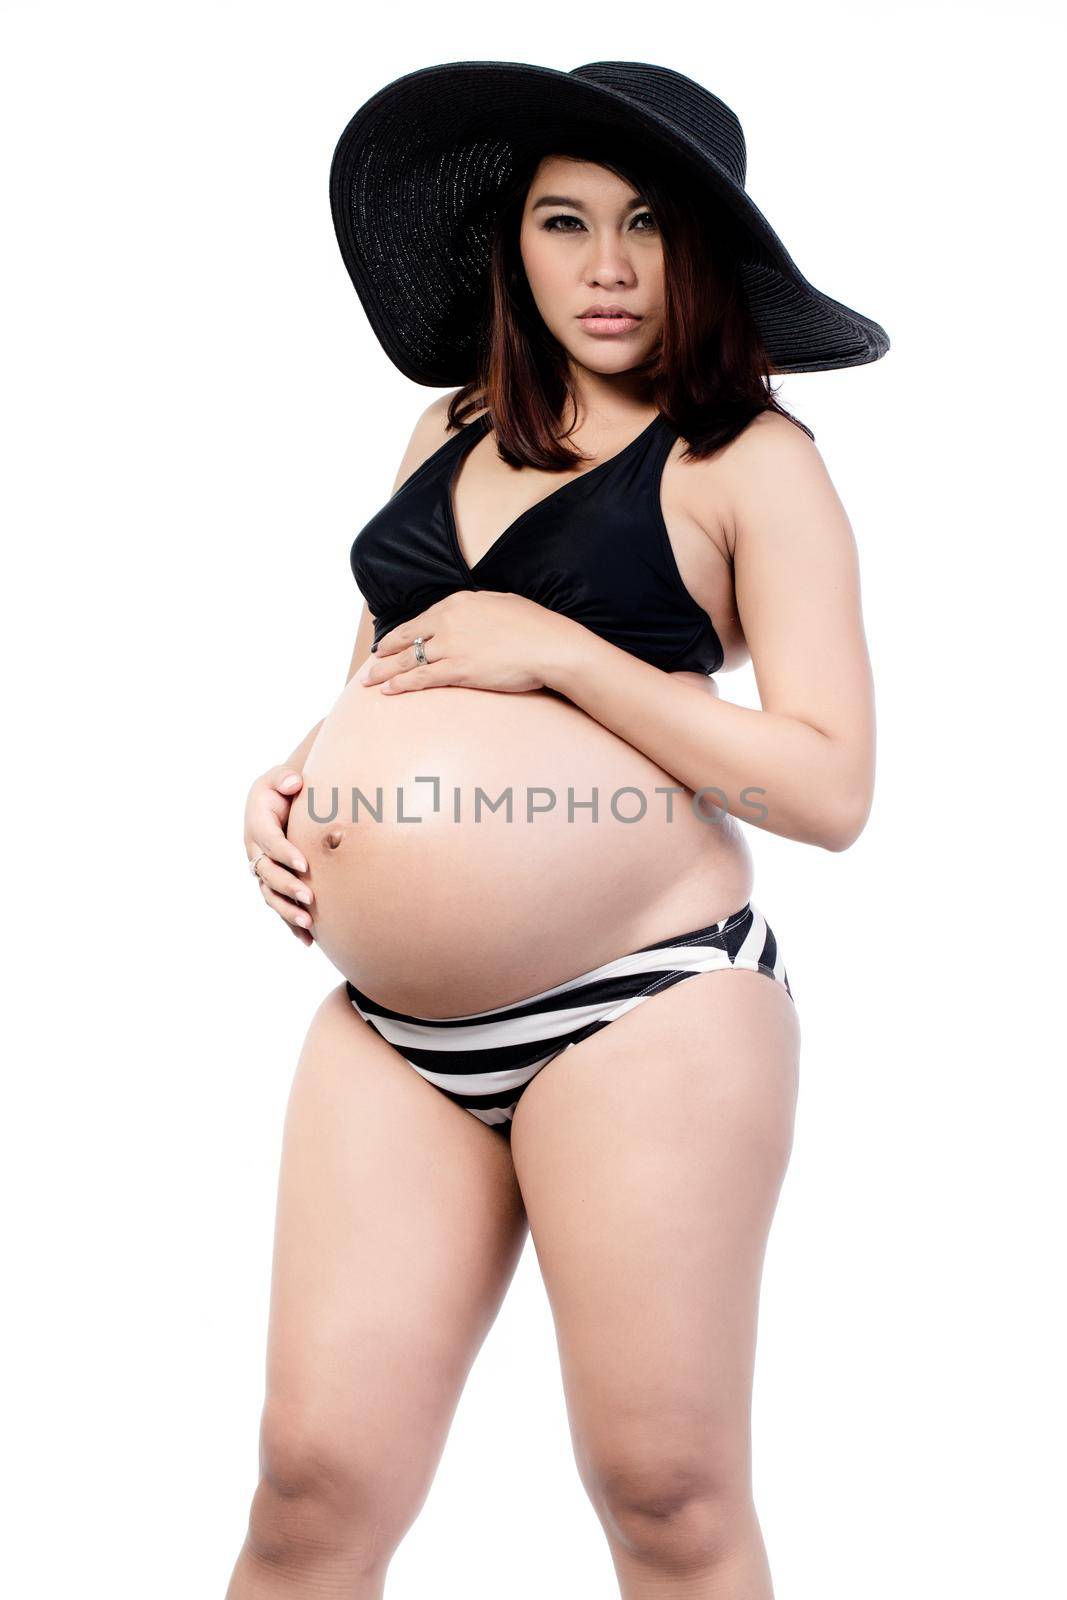 Portrait of pregnant woman in black bikini wearing hat isolated over white background